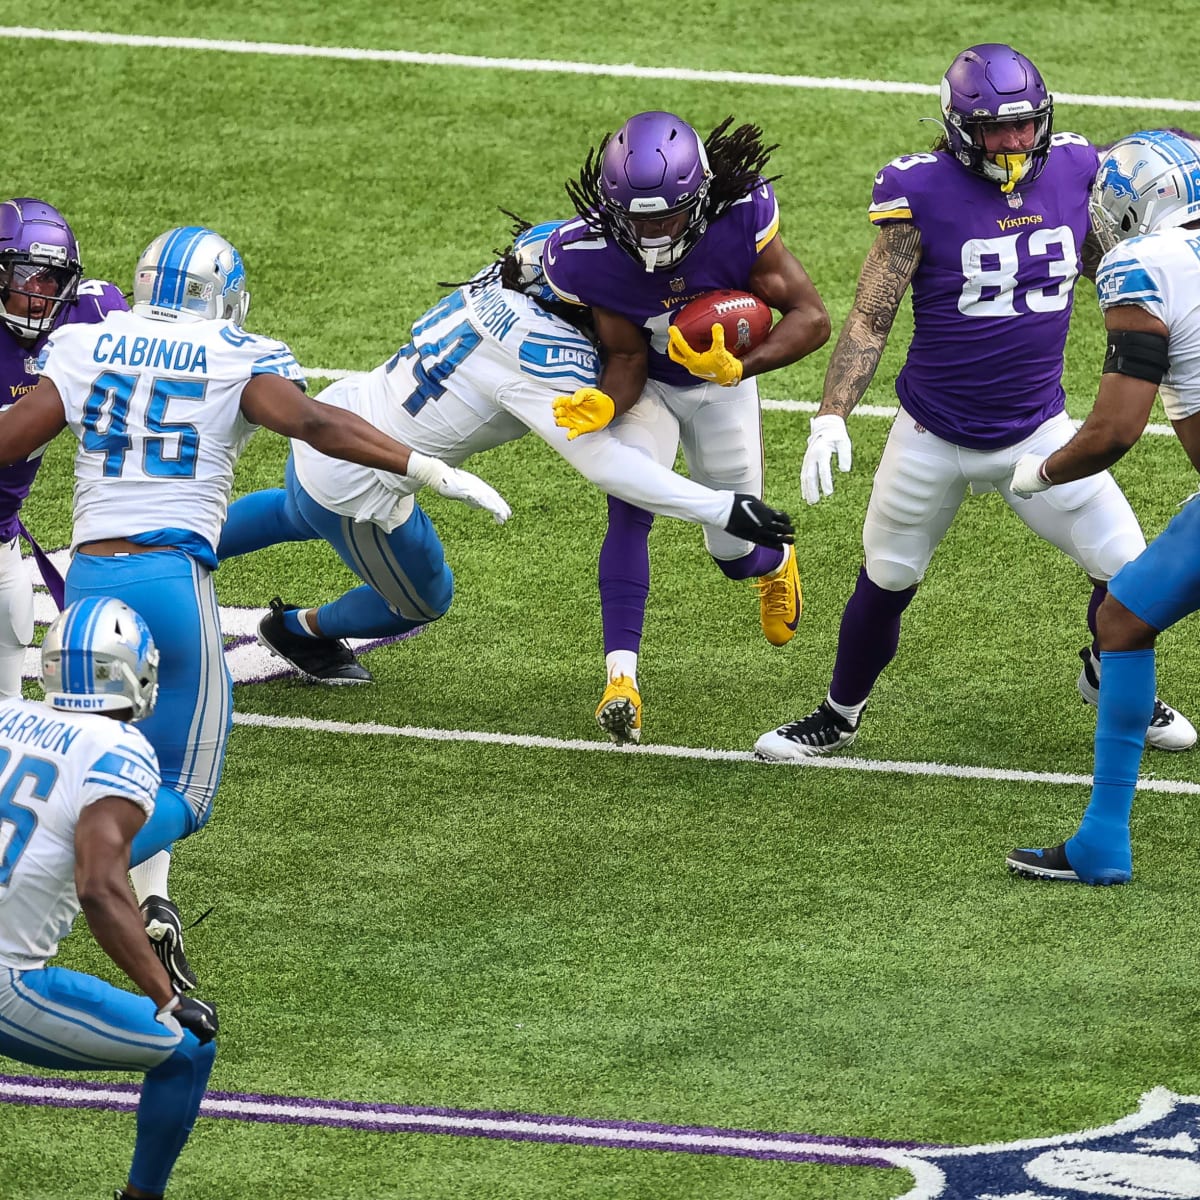 Minnesota Vikings at Detroit Lions: Game time, channel, radio, streaming -  Daily Norseman